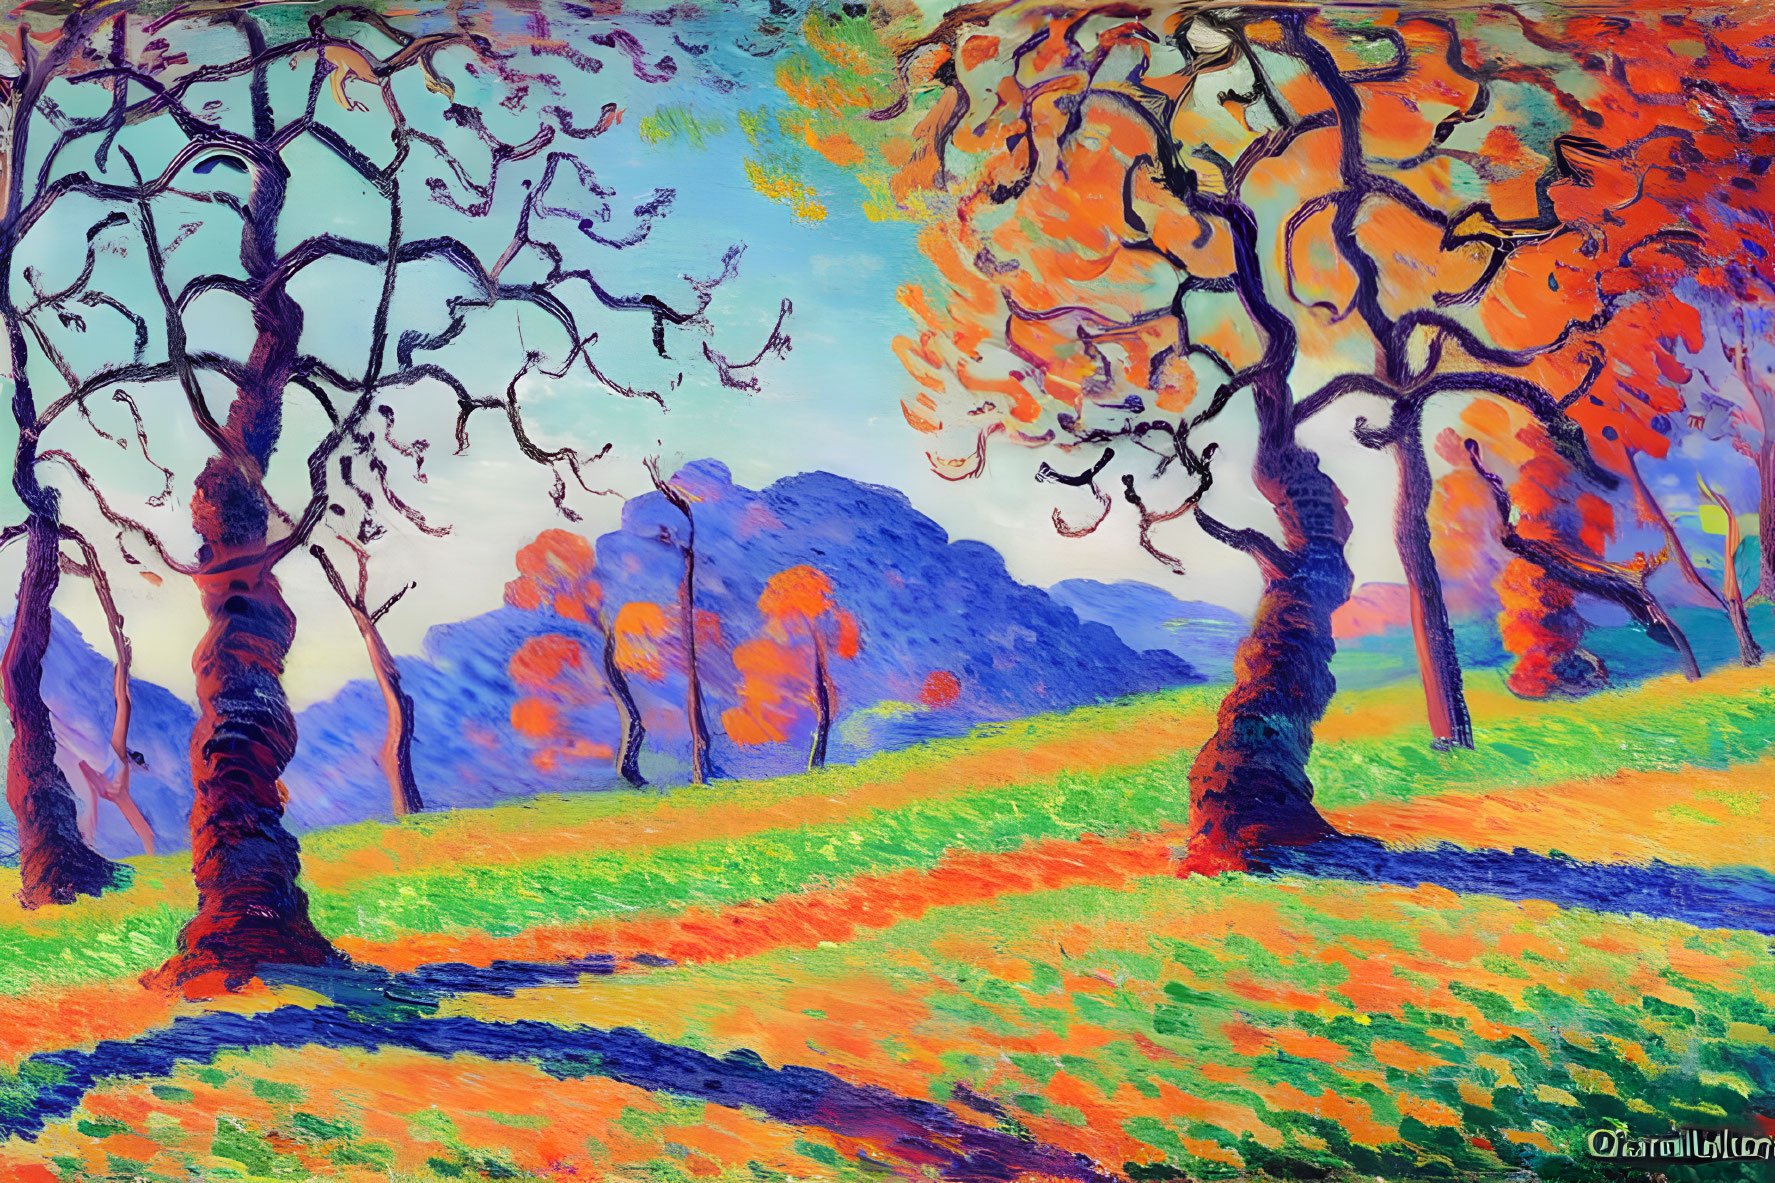 Colorful landscape painting with stylized autumn trees, green hills, and blue mountains.